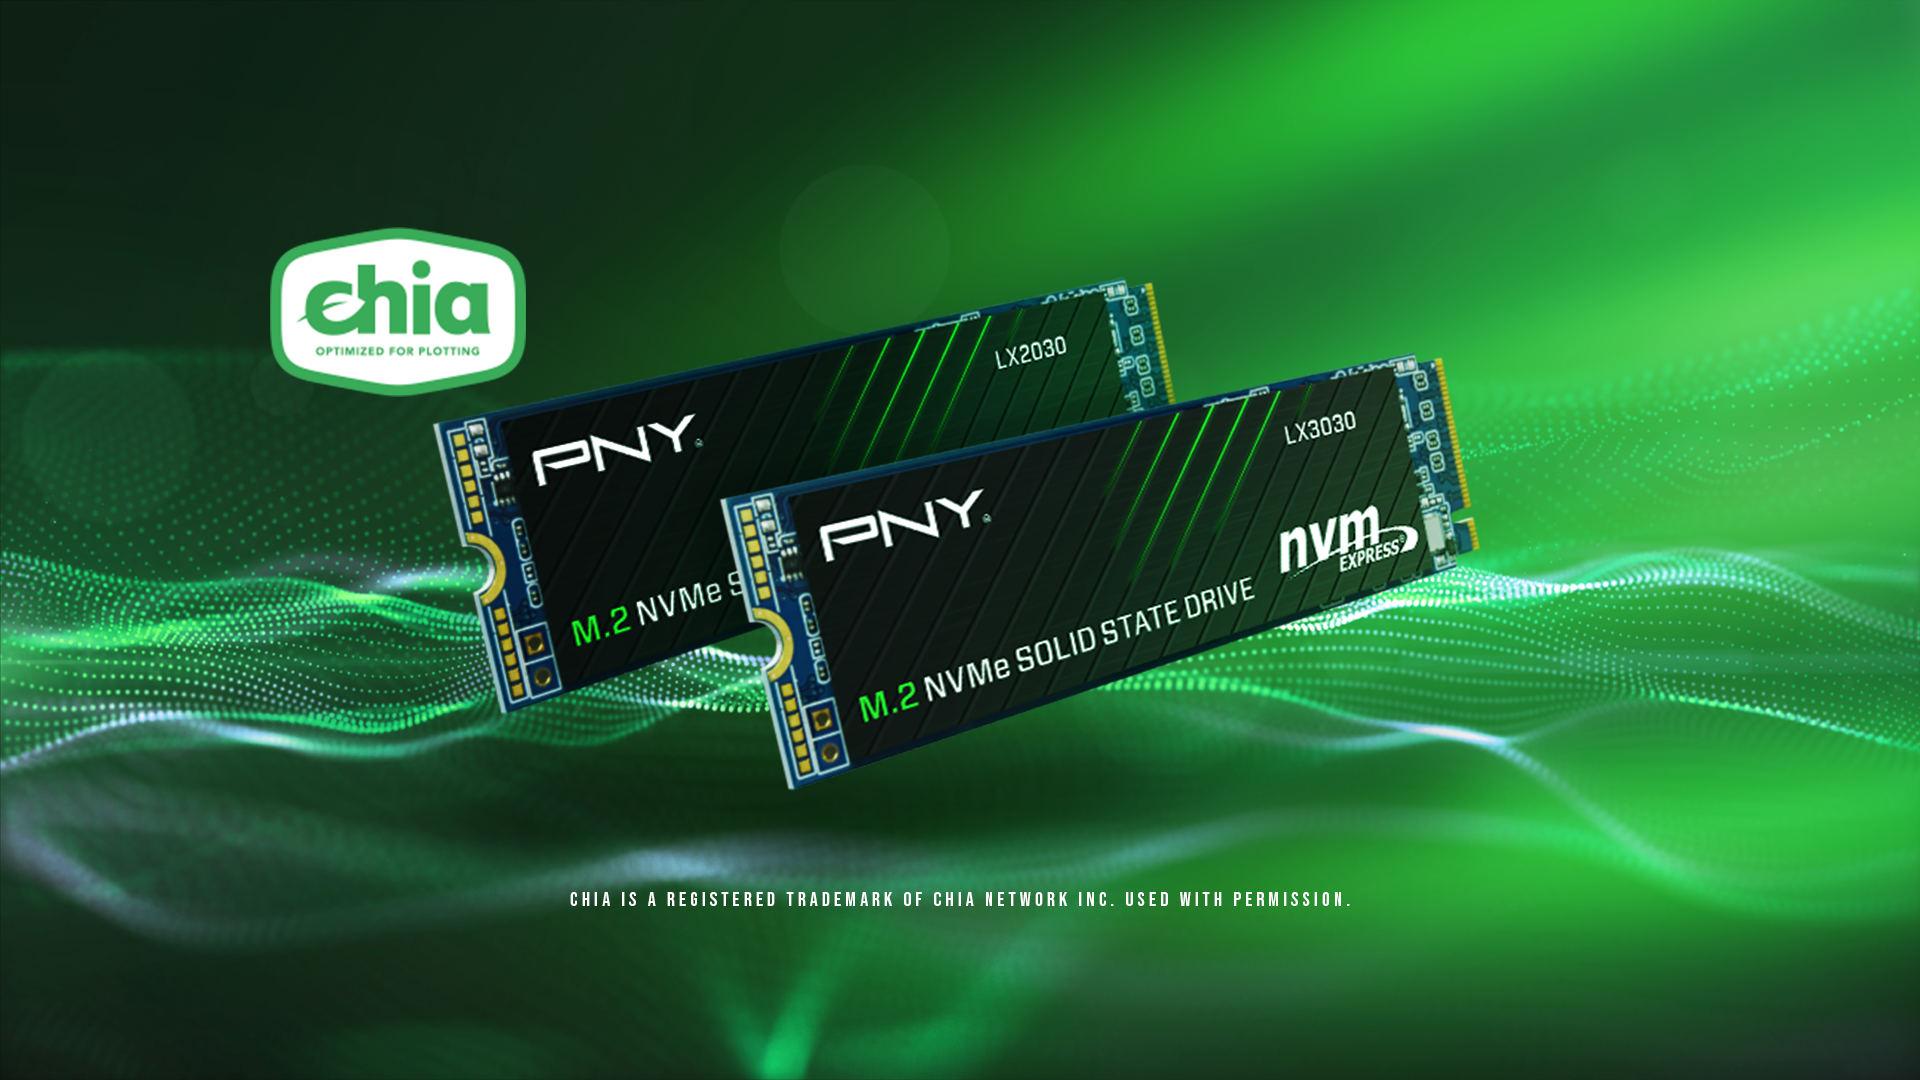 PNY Plotripper SSD product photo with Chia optimized badge